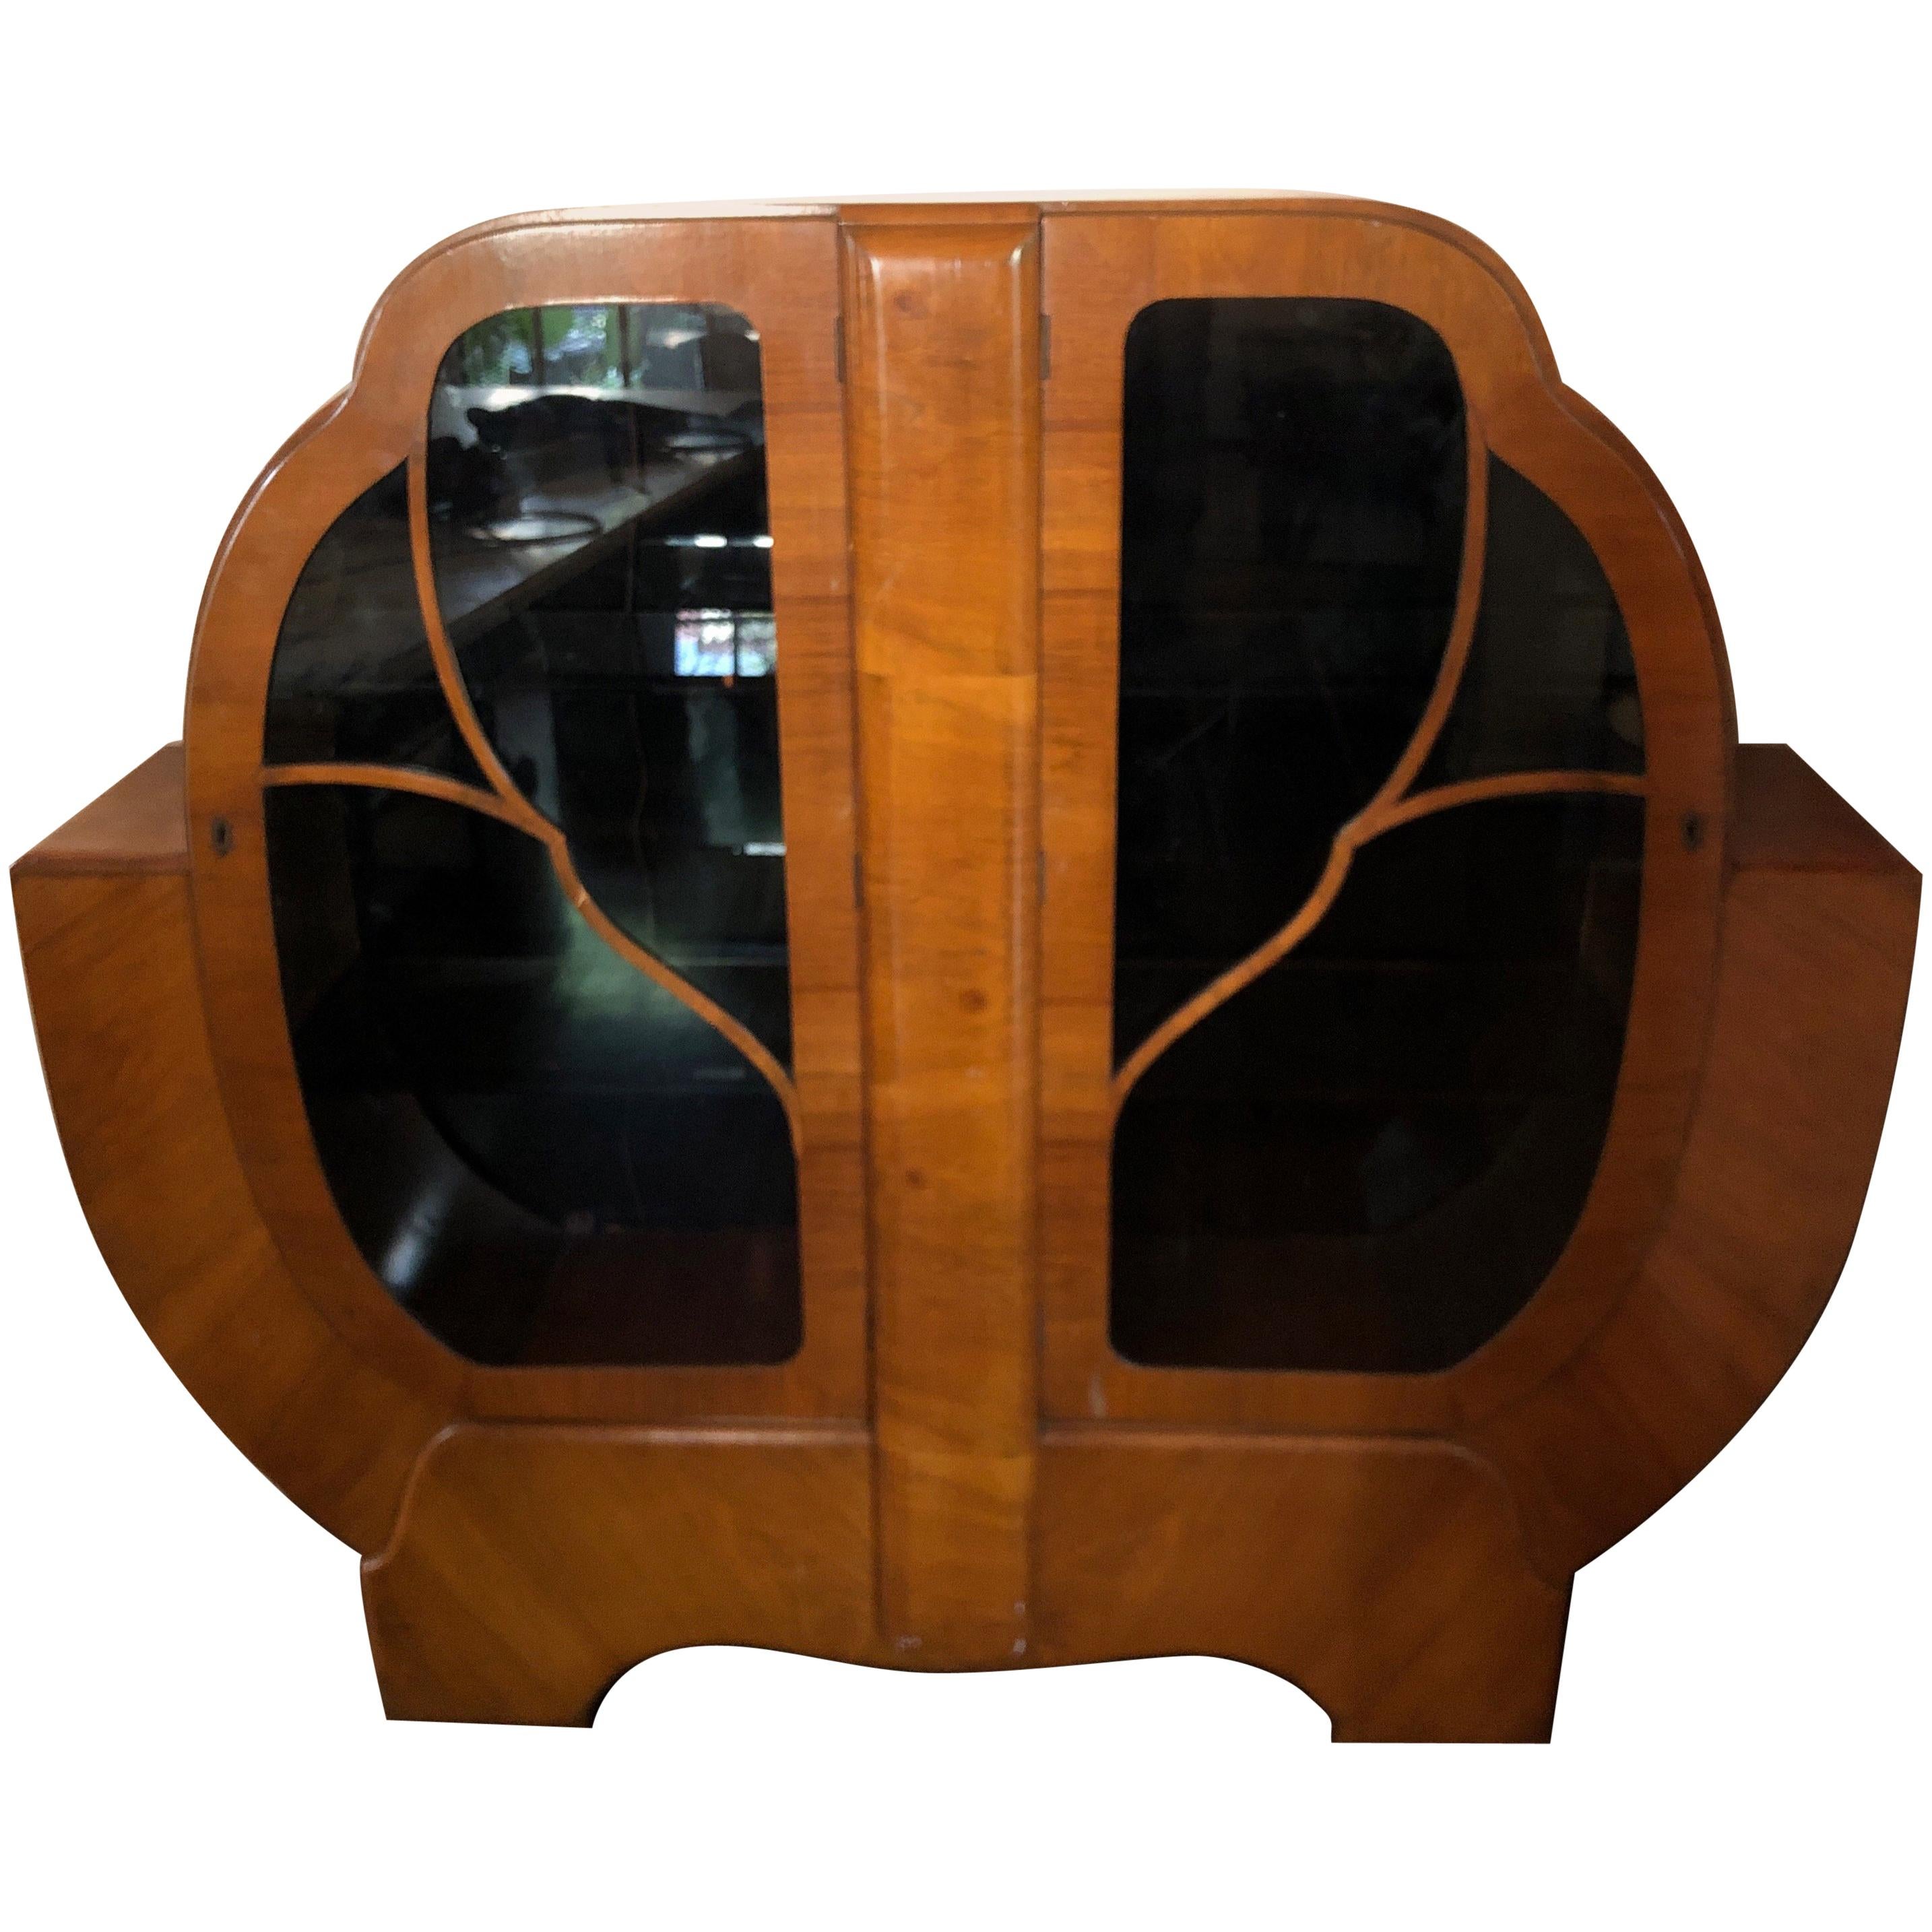 Art Deco French Dry Bar Liquor/Cocktail Cabinet in Walnut